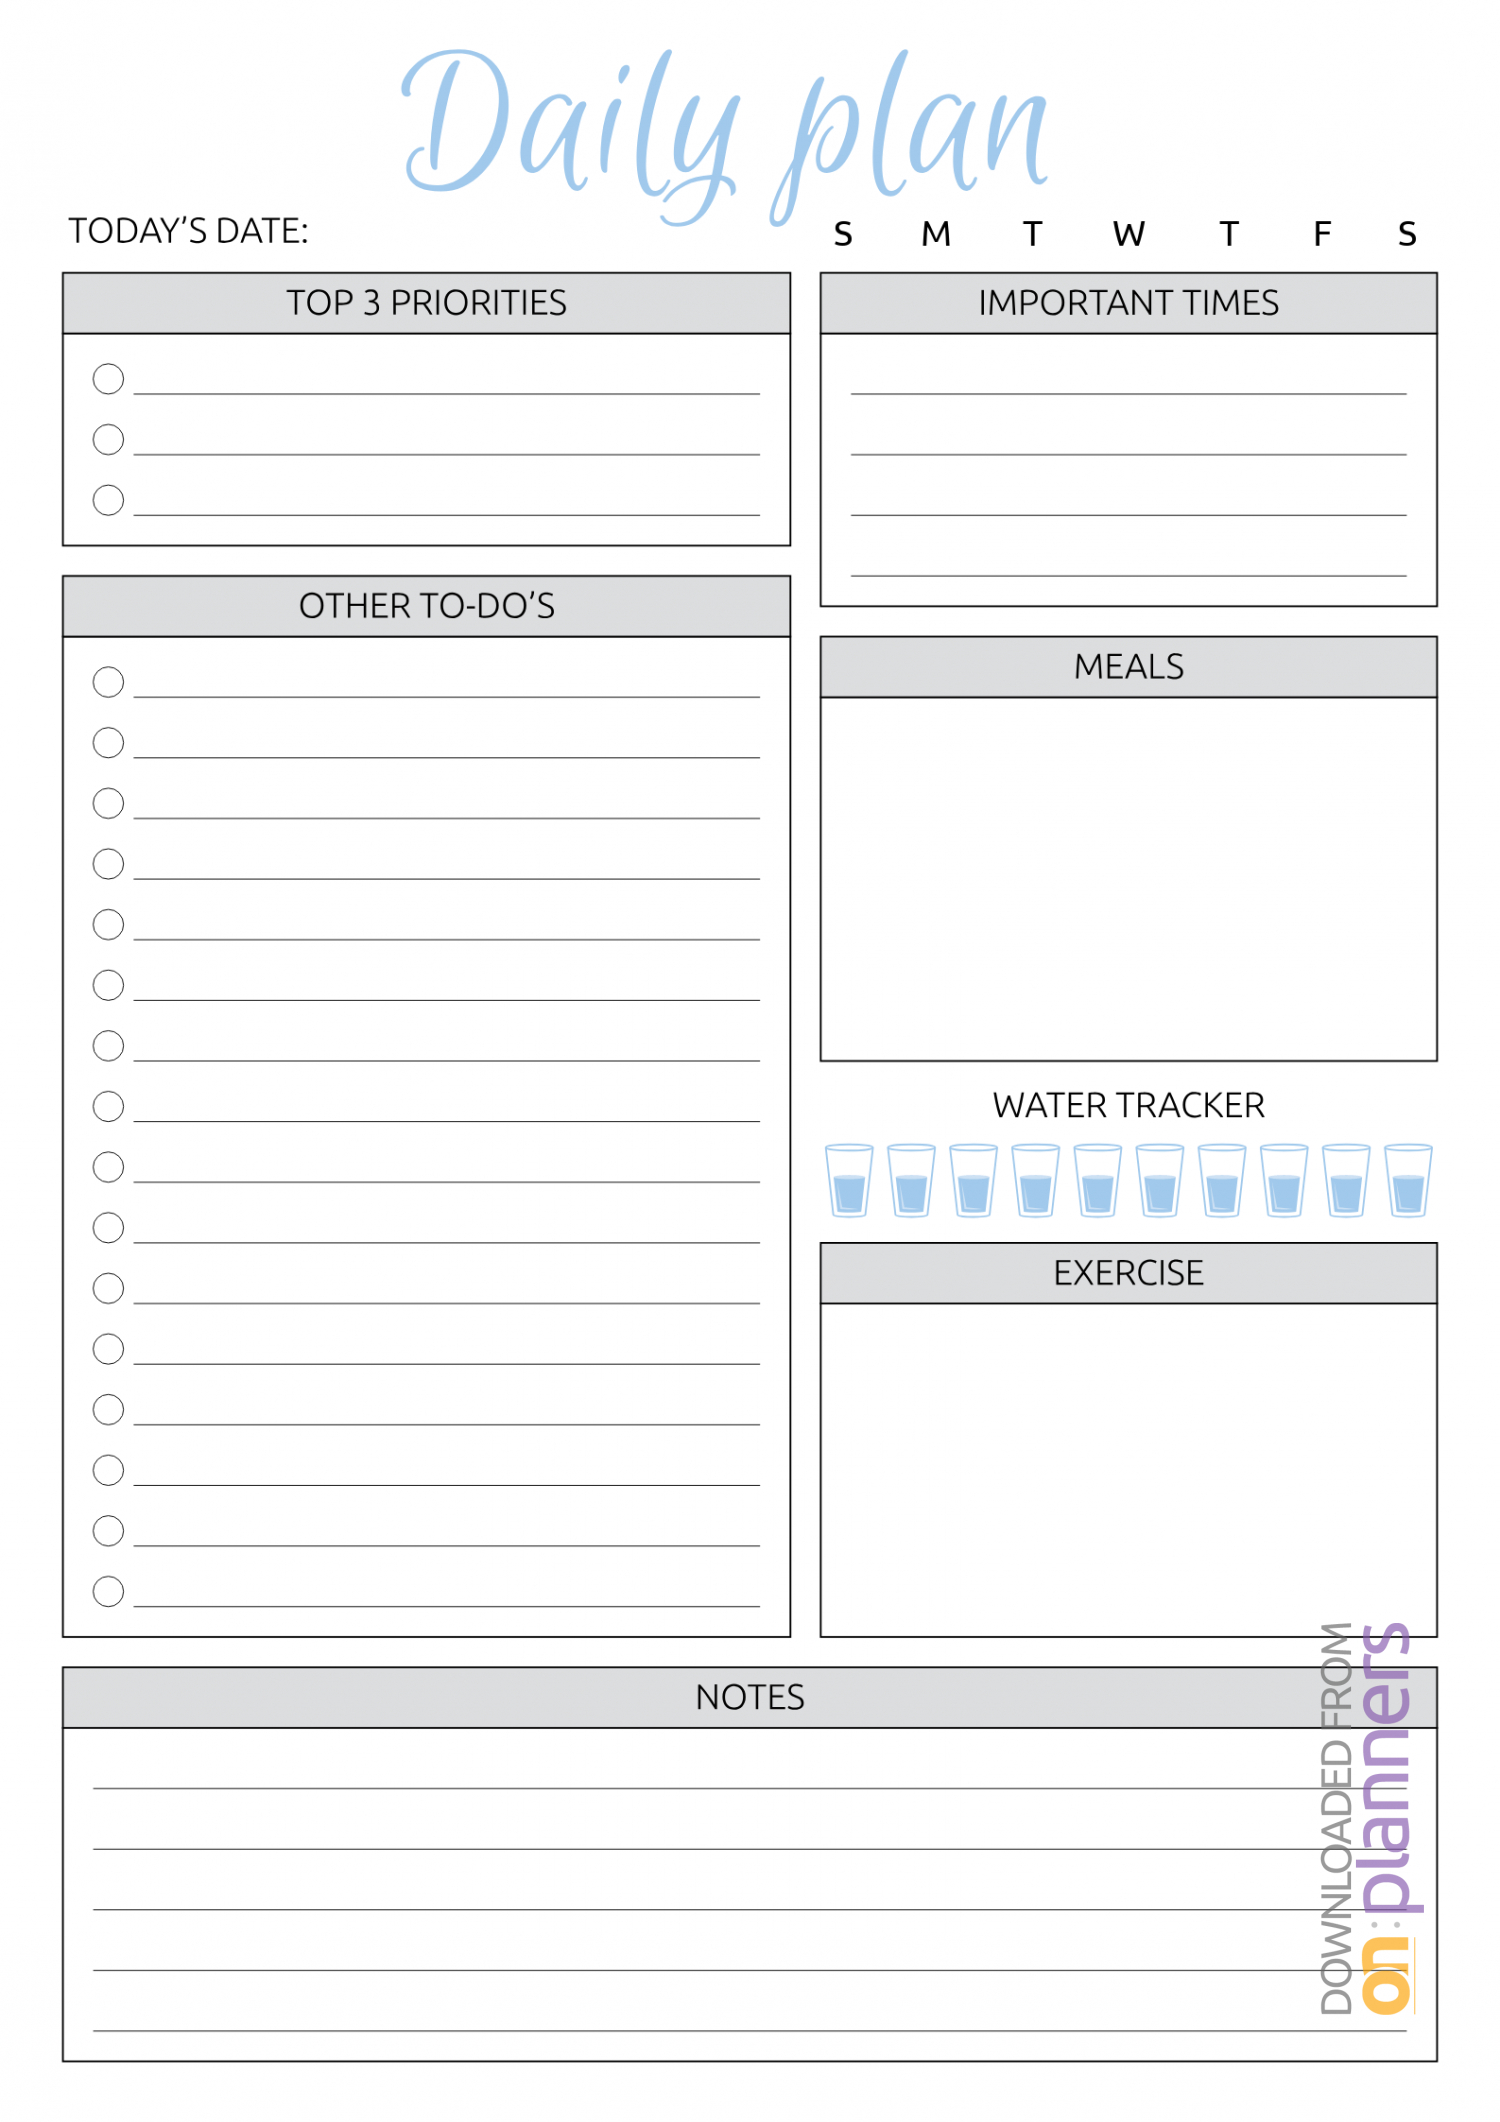 Download Printable Daily Plan With To Do List & Important Pertaining To Blank To Do List Template